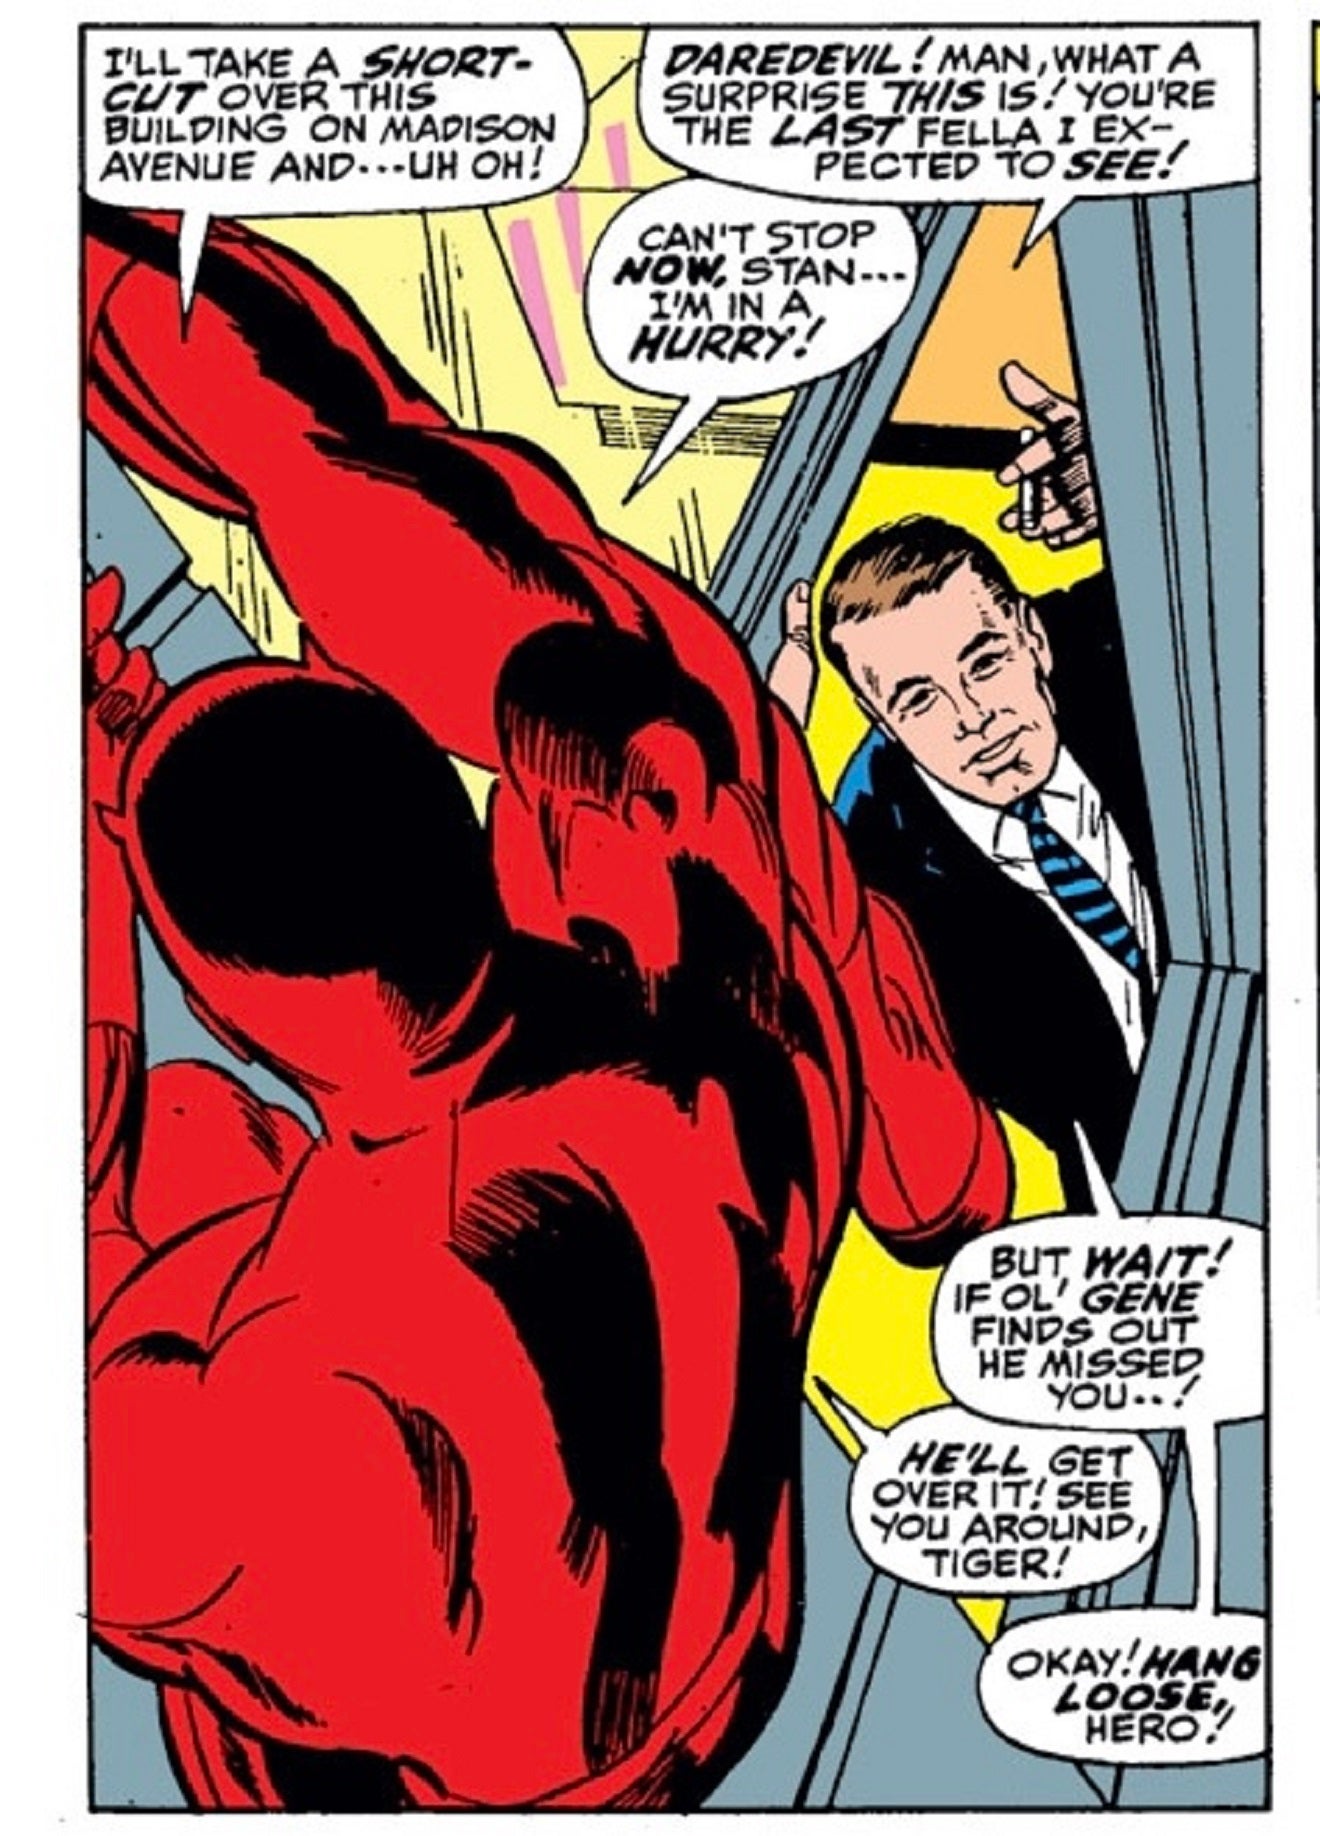 Panel of Daredevil swinging by a Marvel office